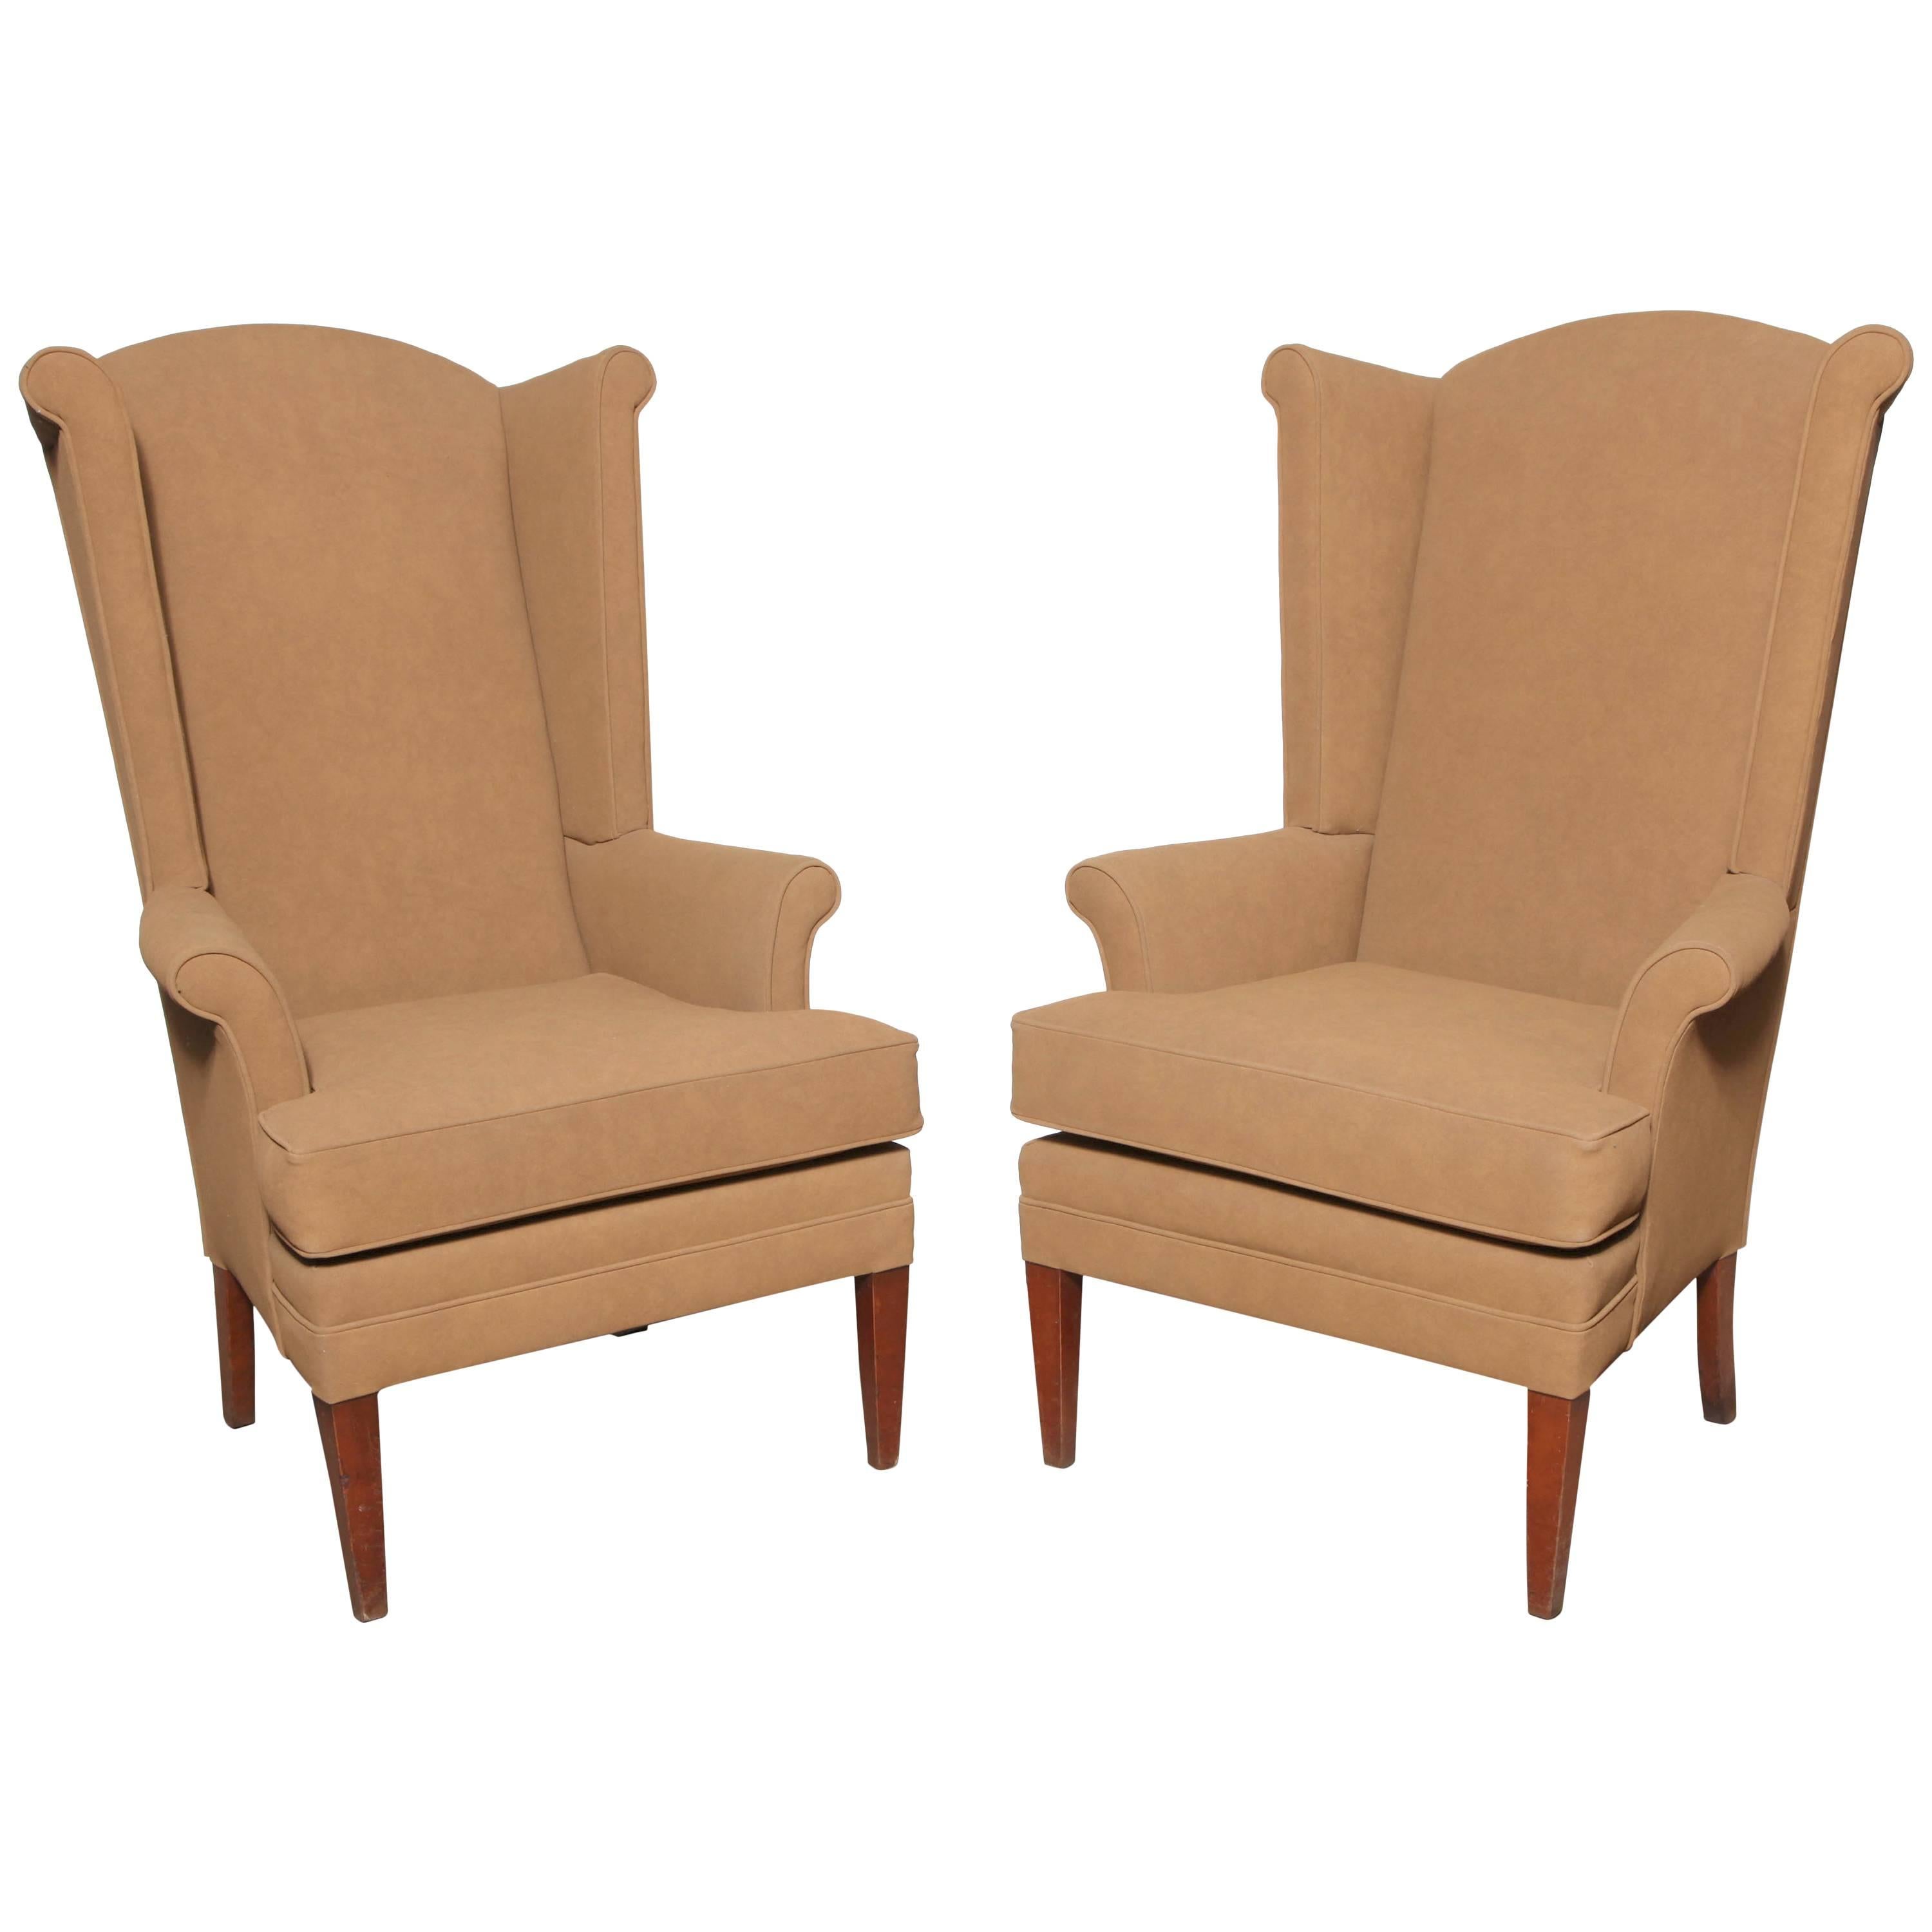 Pair of Tall, Narrow Mid Century Camel Highback Wingback Chairs